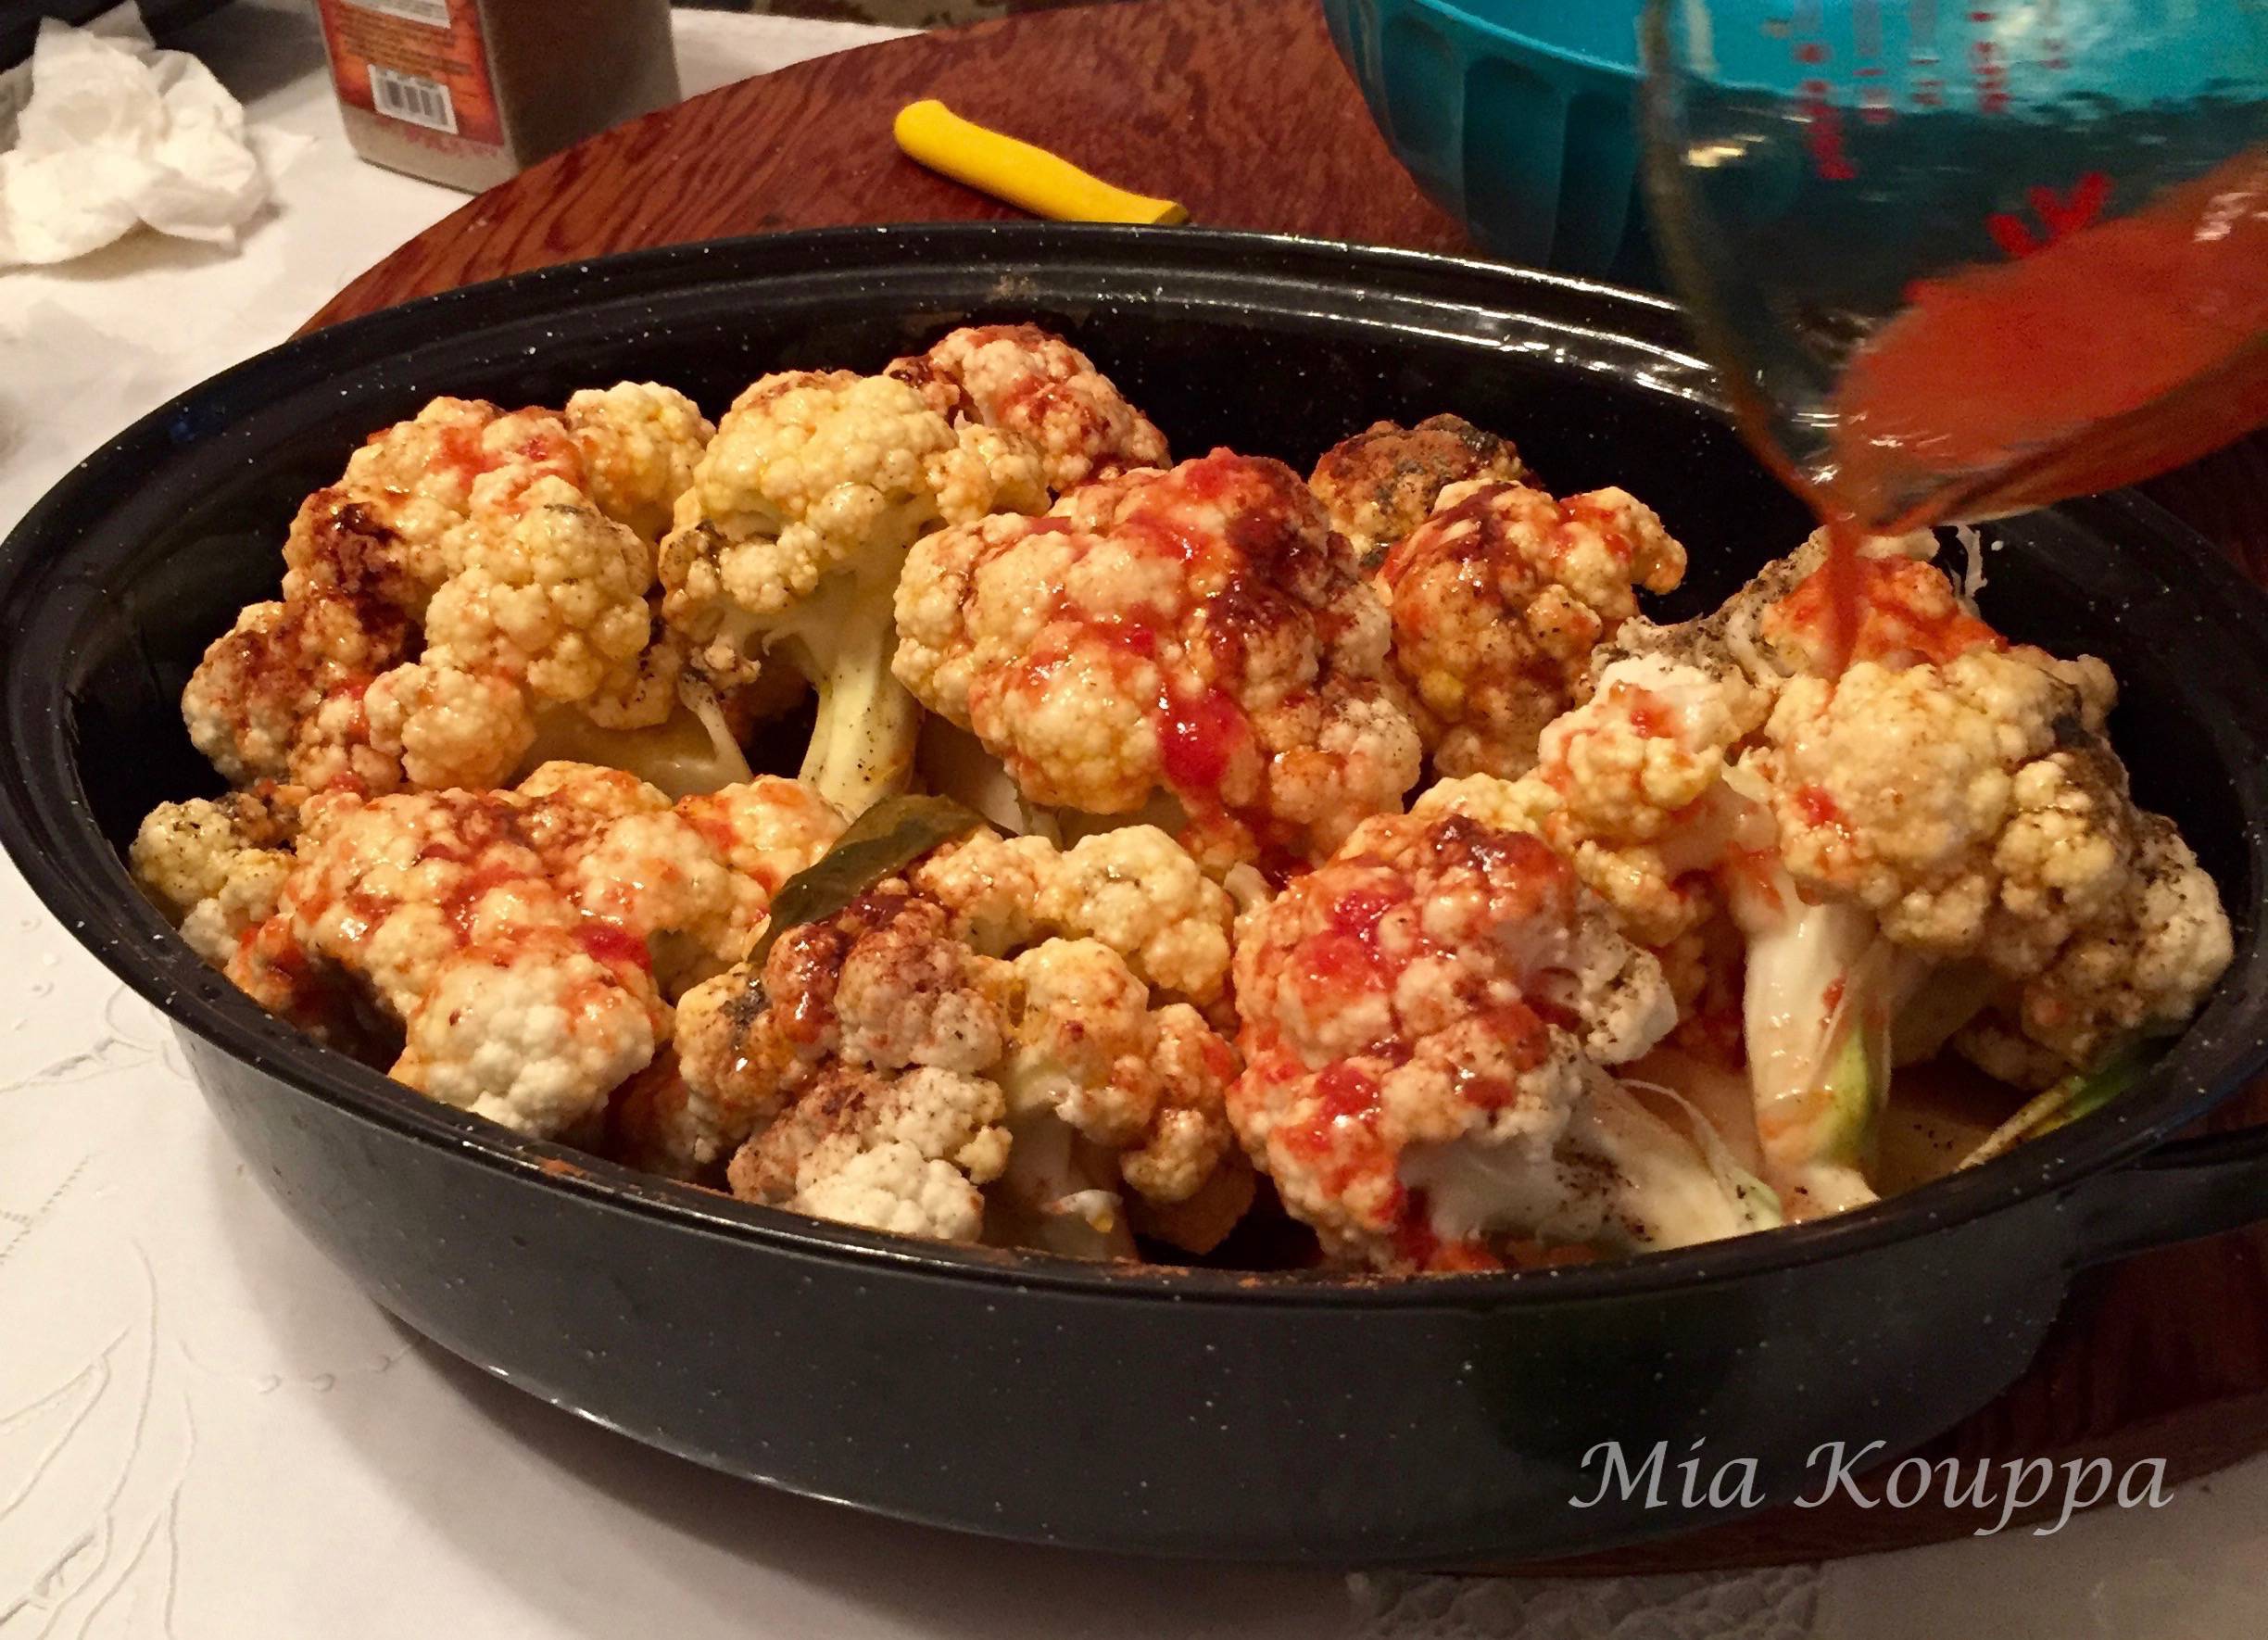 Roasted Cauliflower with spices and tomato sauce